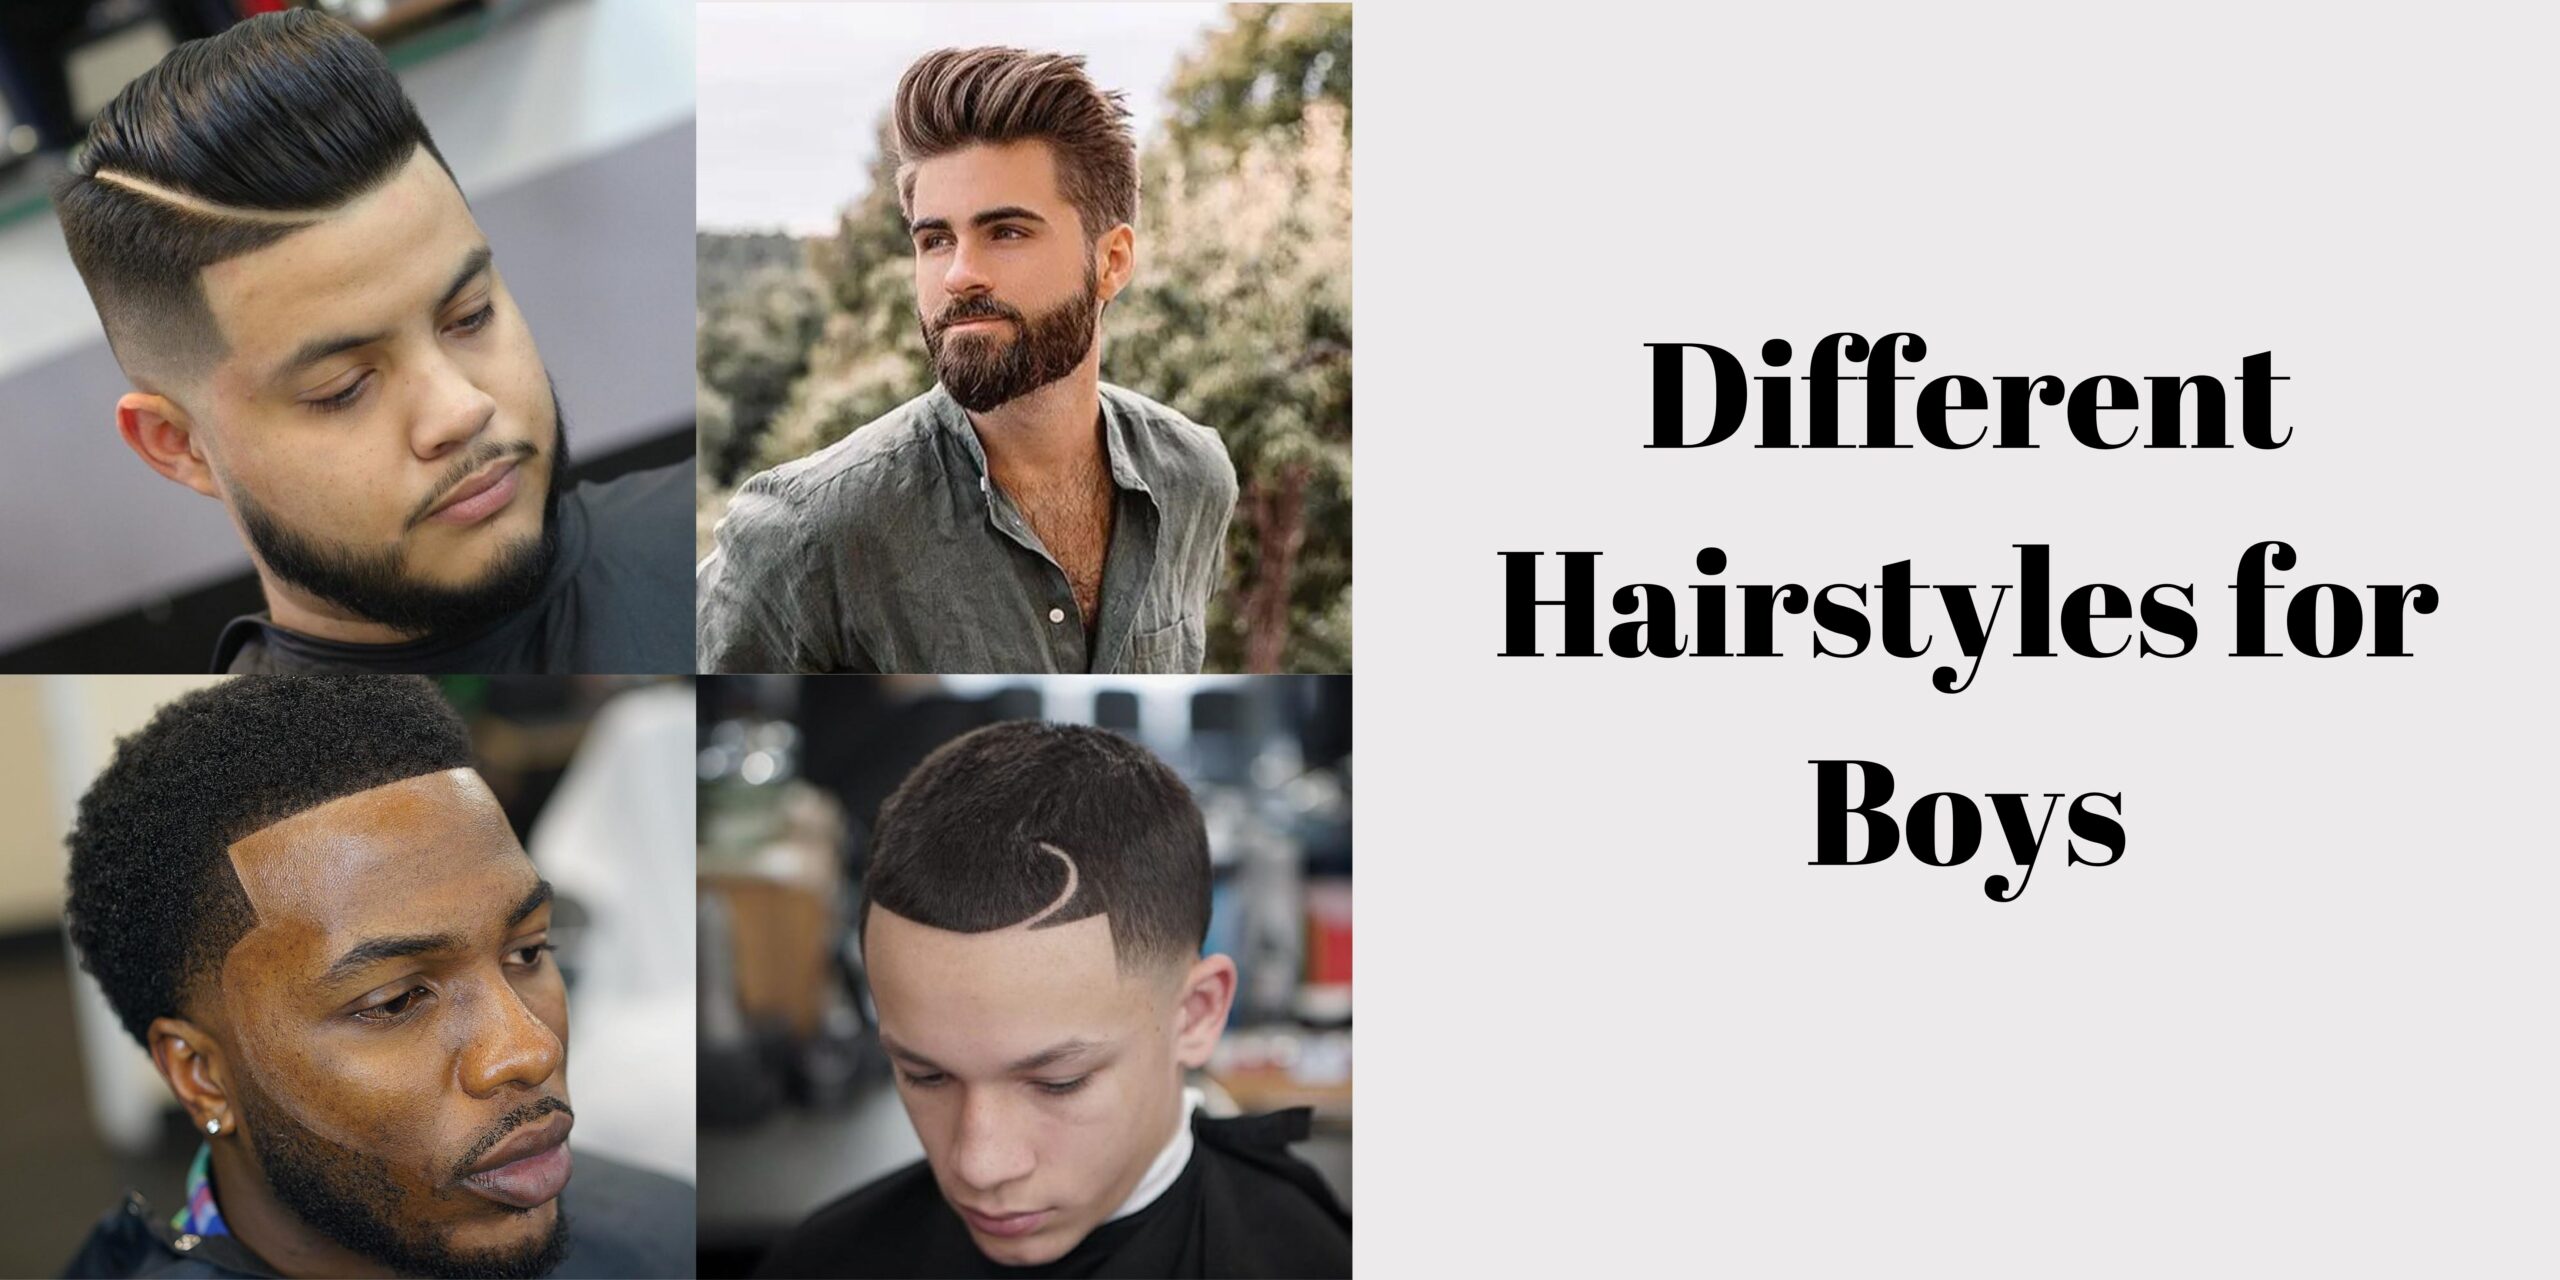 Boys Haircut  Hairstyle for mens 2020 Complete Guide krazzyfashion